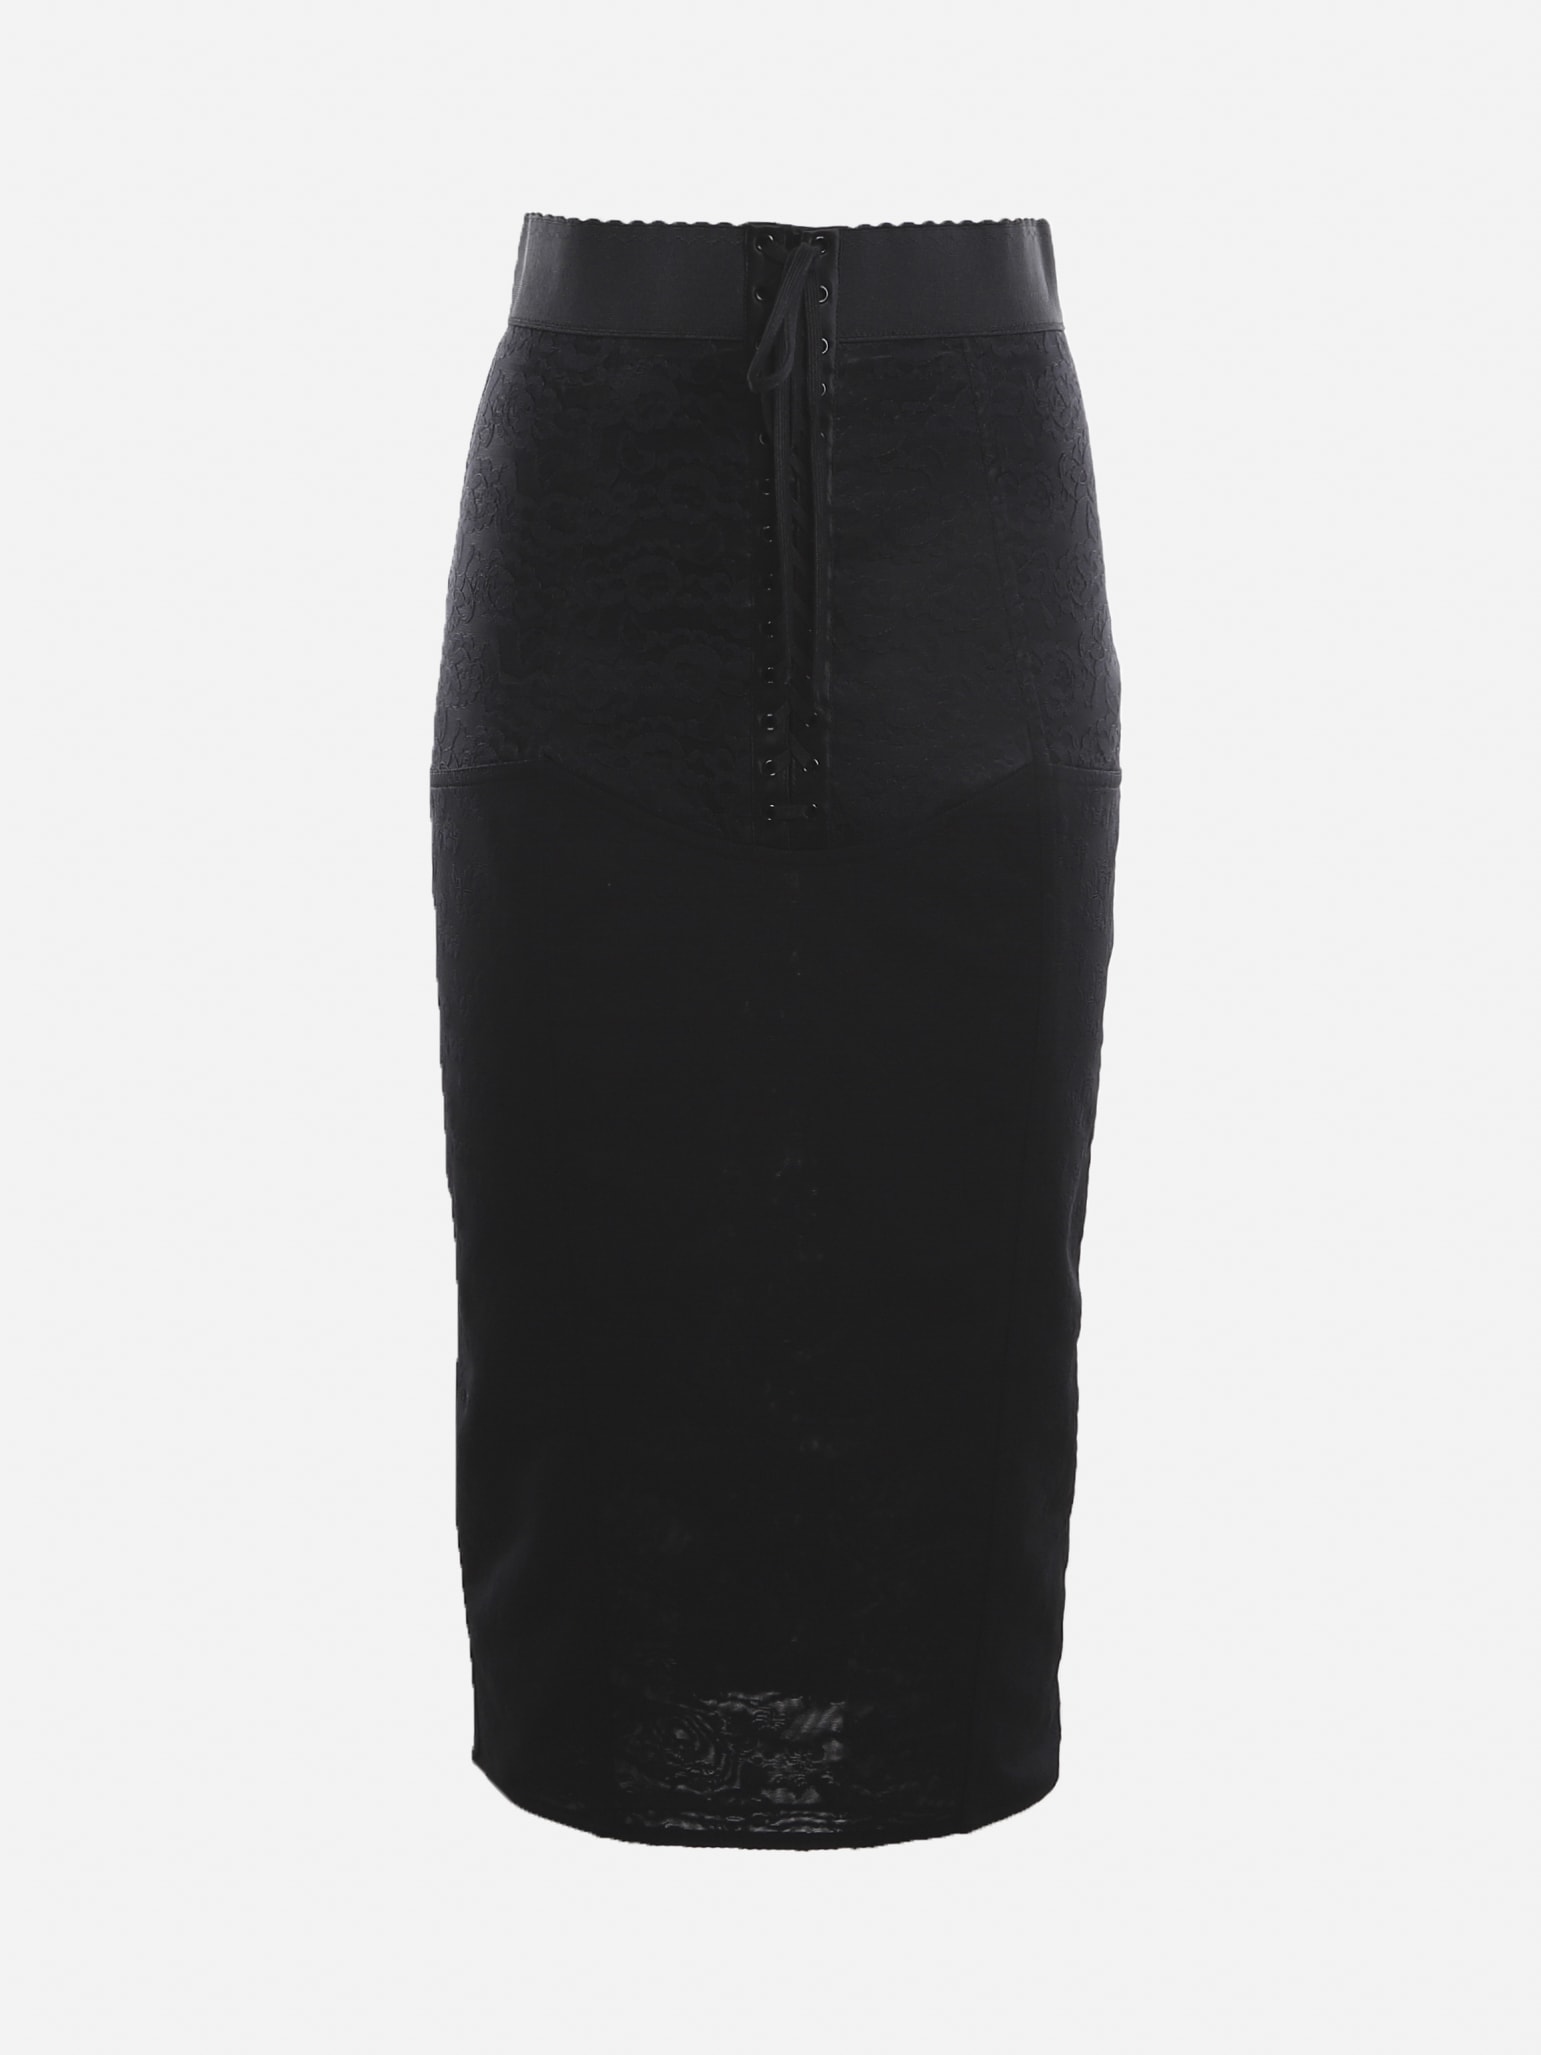 Dolce & Gabbana Lace Pencil Skirt With Corset Detail In Black